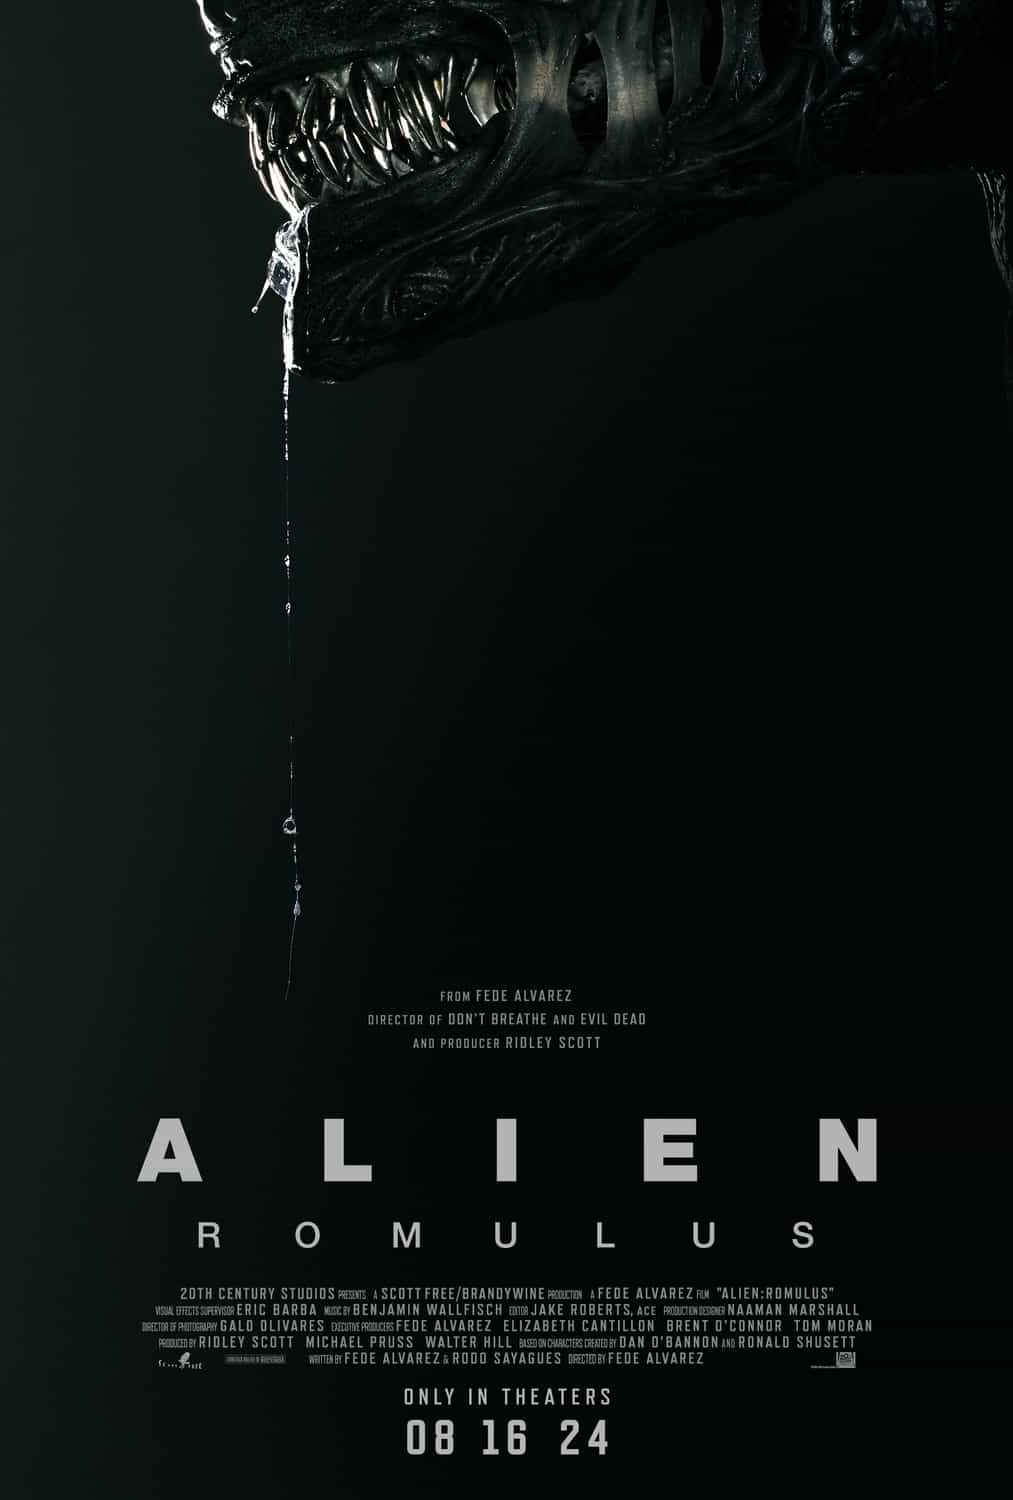 Check out the new trailer and poster for upcoming movie Alien Romulus which stars Cailee Spaeny and Isabela Merced - movie UK release date 16th August 2024 #alienromulus